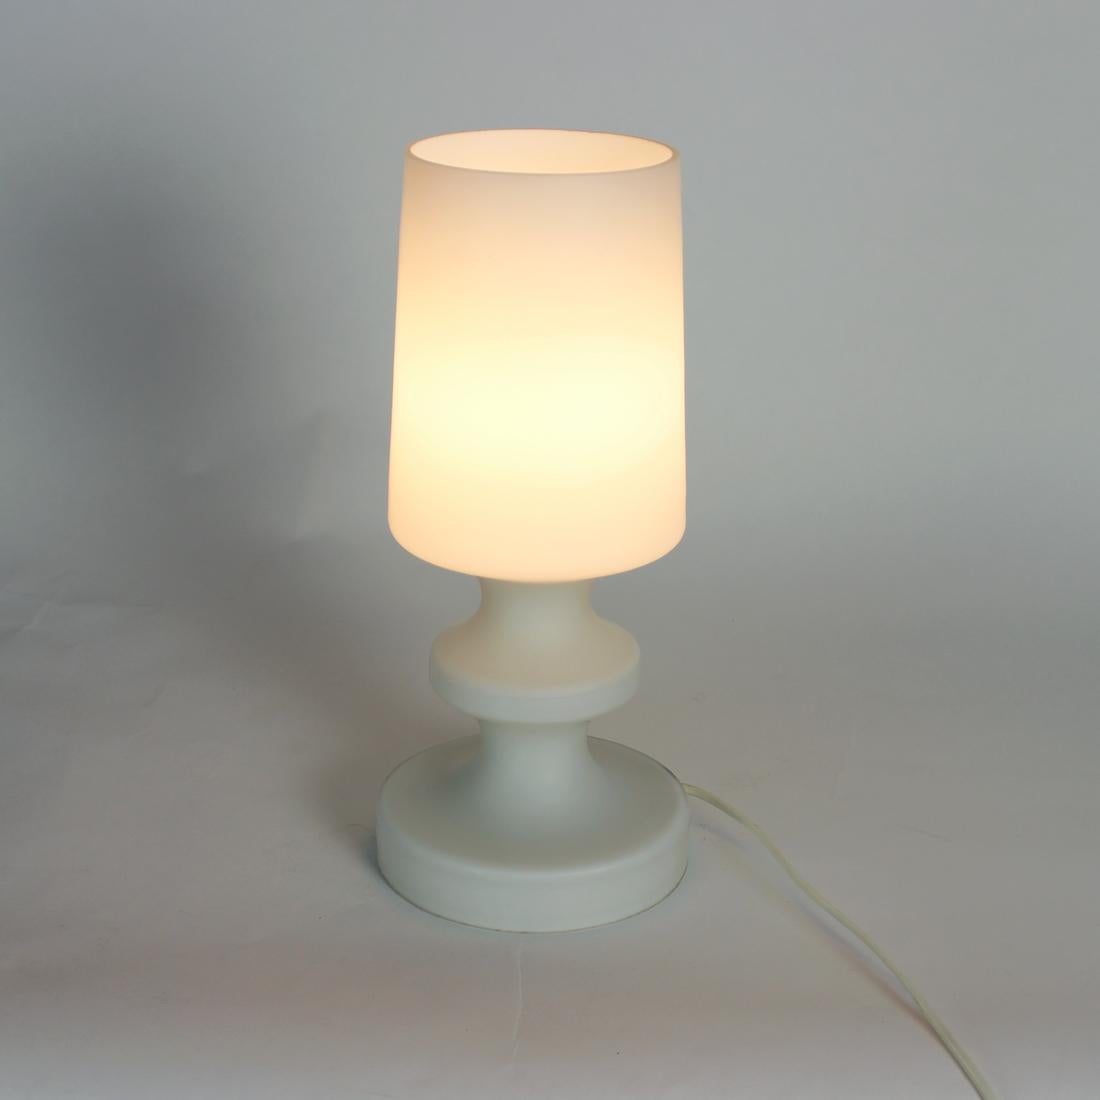 White Opaline Glass Table Lamp in Chessman Design, Stefan Tabery, 1960s In Excellent Condition For Sale In Zohor, SK